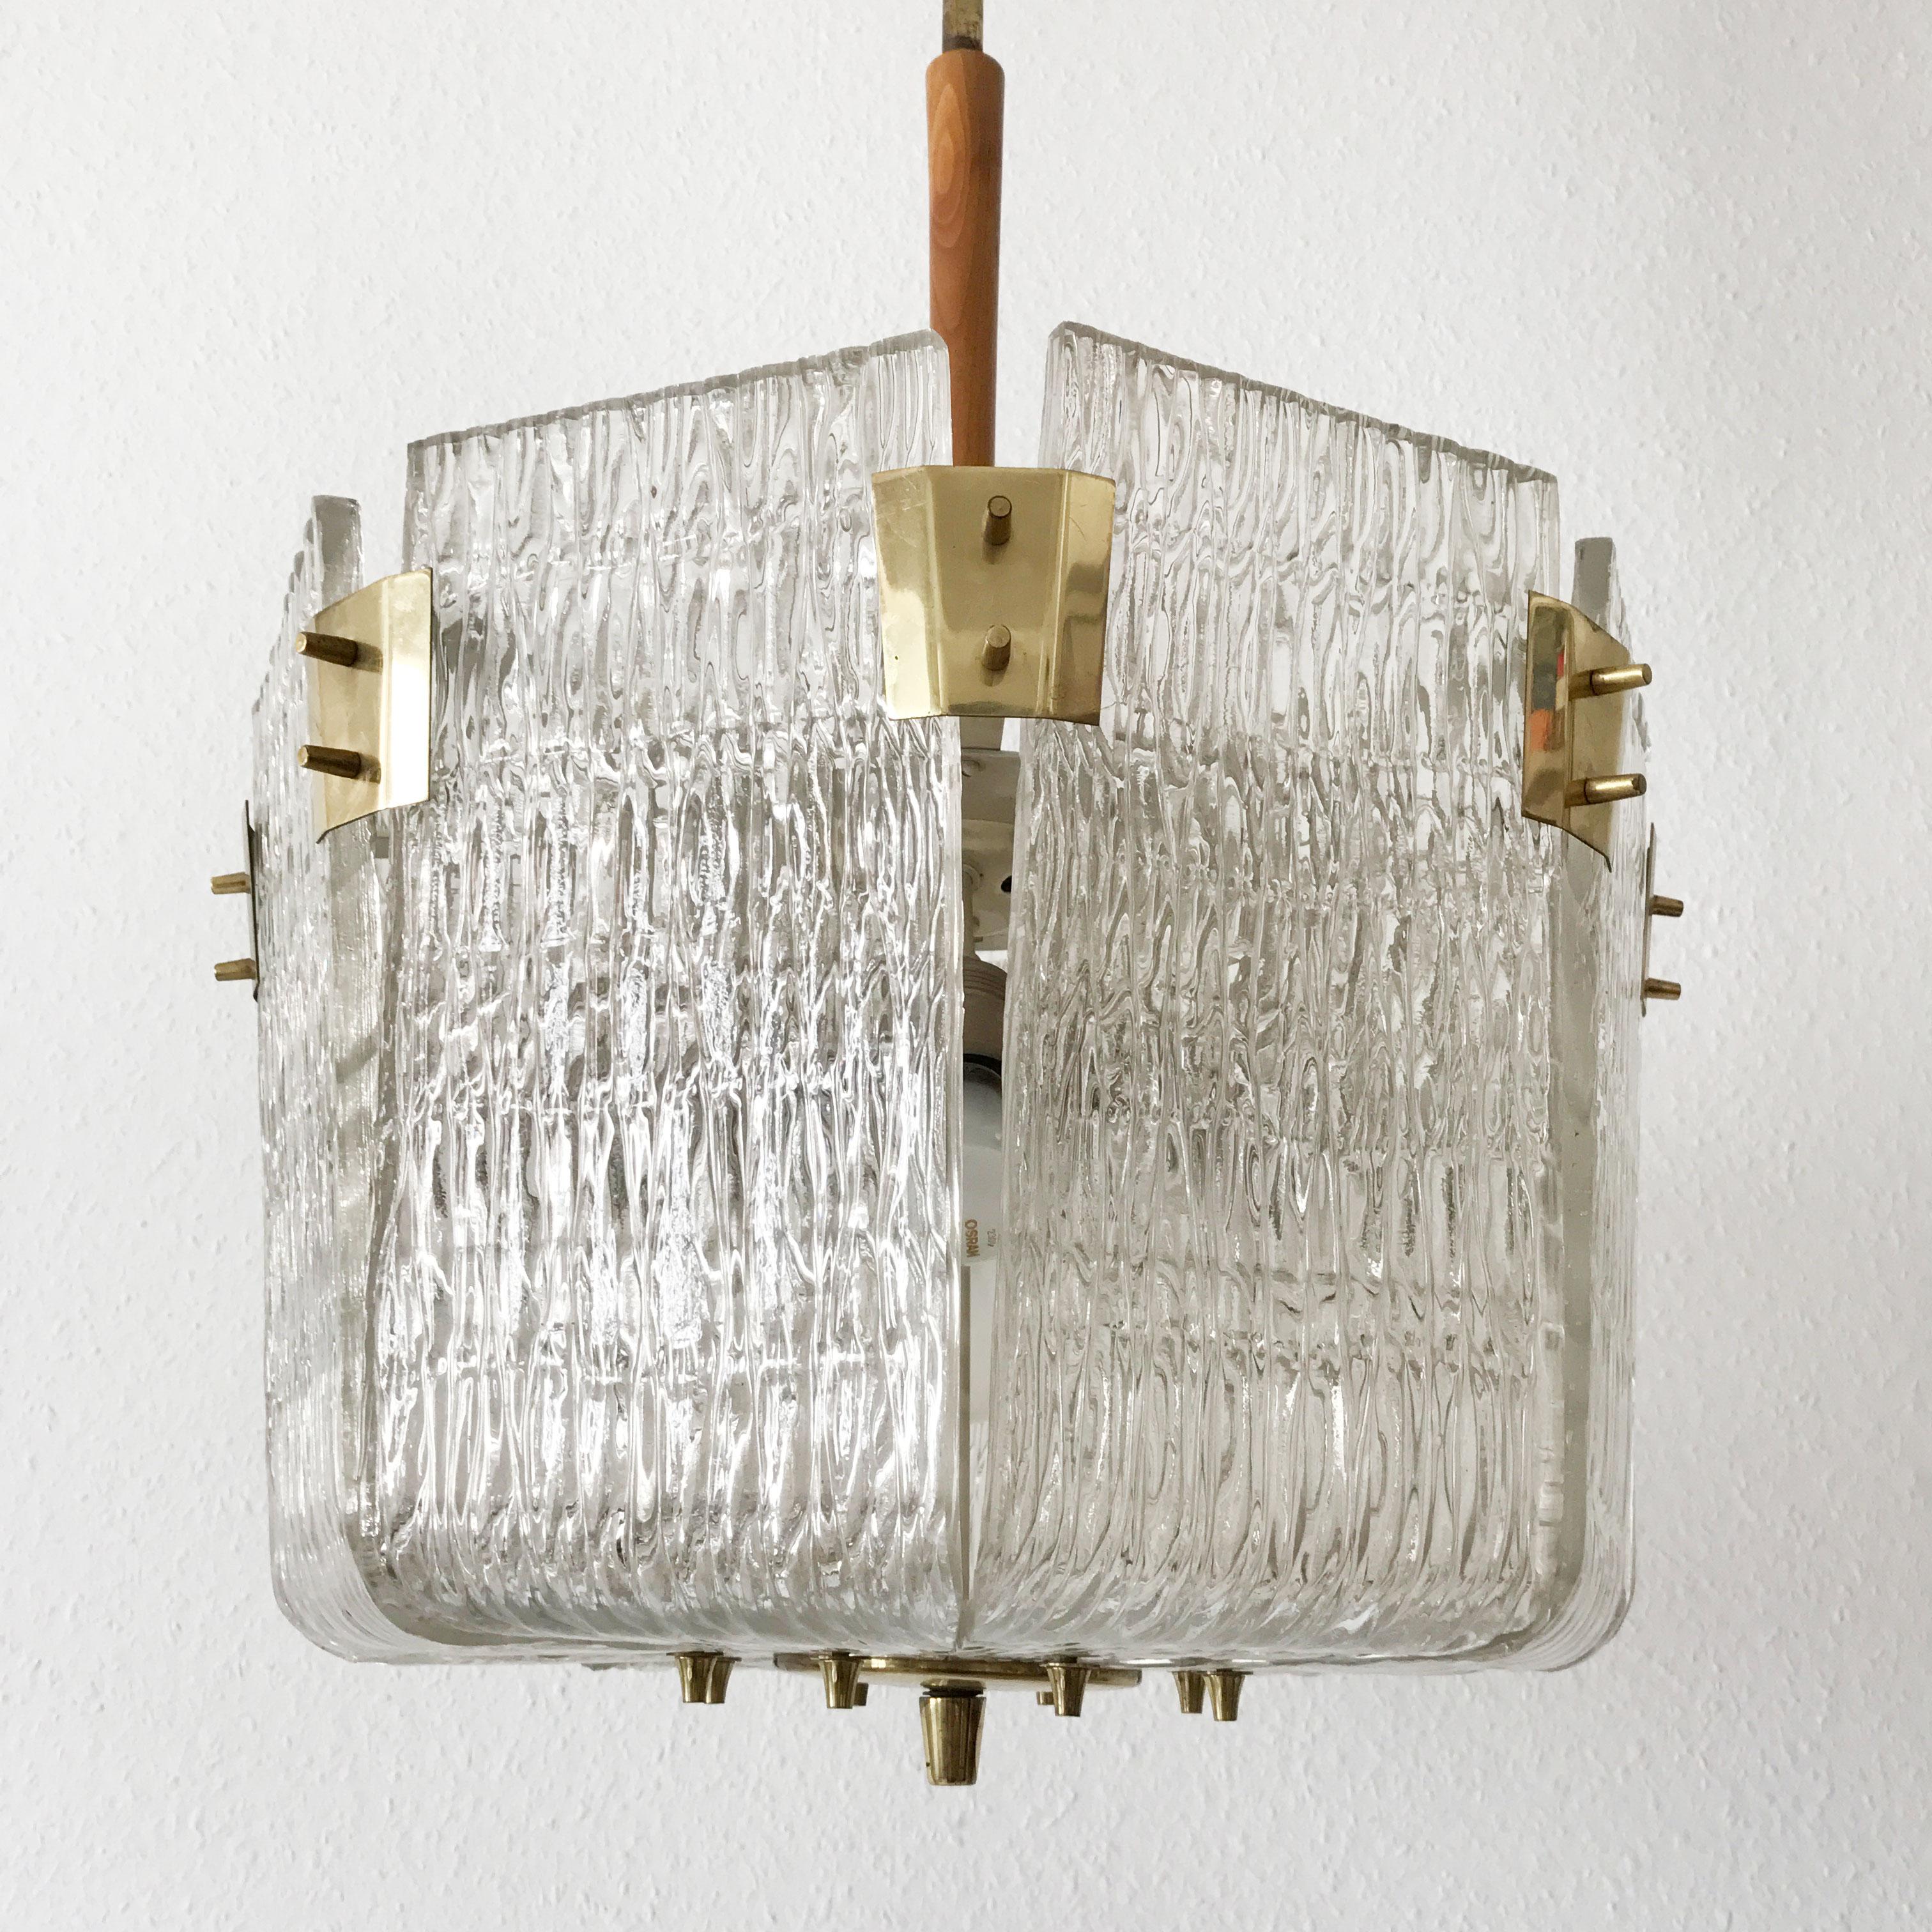 Frosted Monumental Midcentury Basket Chandelier or Pendant Lamp by J.T. Kalmar, 1950s For Sale